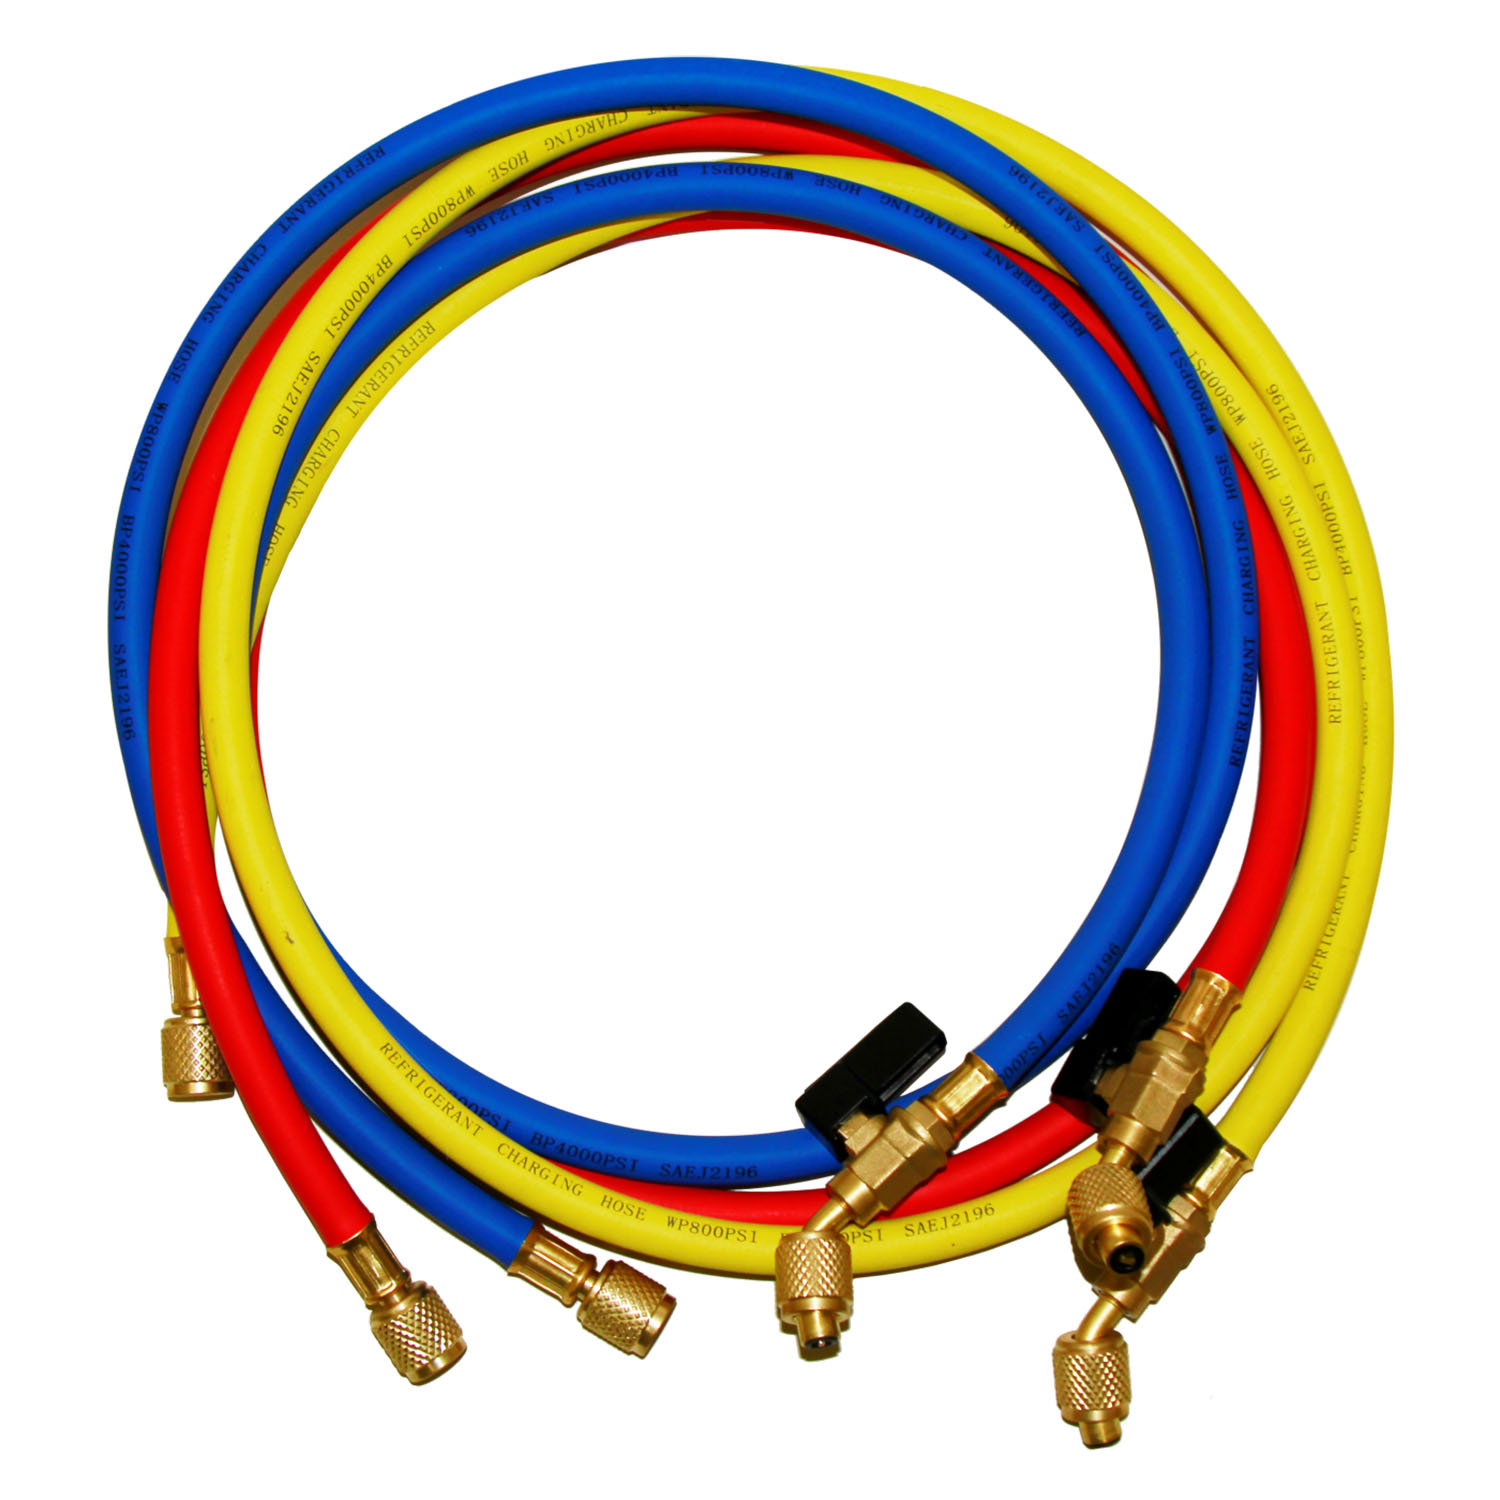 Kit n° 3 charging hoses R410A/R32 (red + yellow + blue) - lenght 150 cm. - connection 5/16 SAE on 45° check valve side, connection 1/4 SAE on straight side